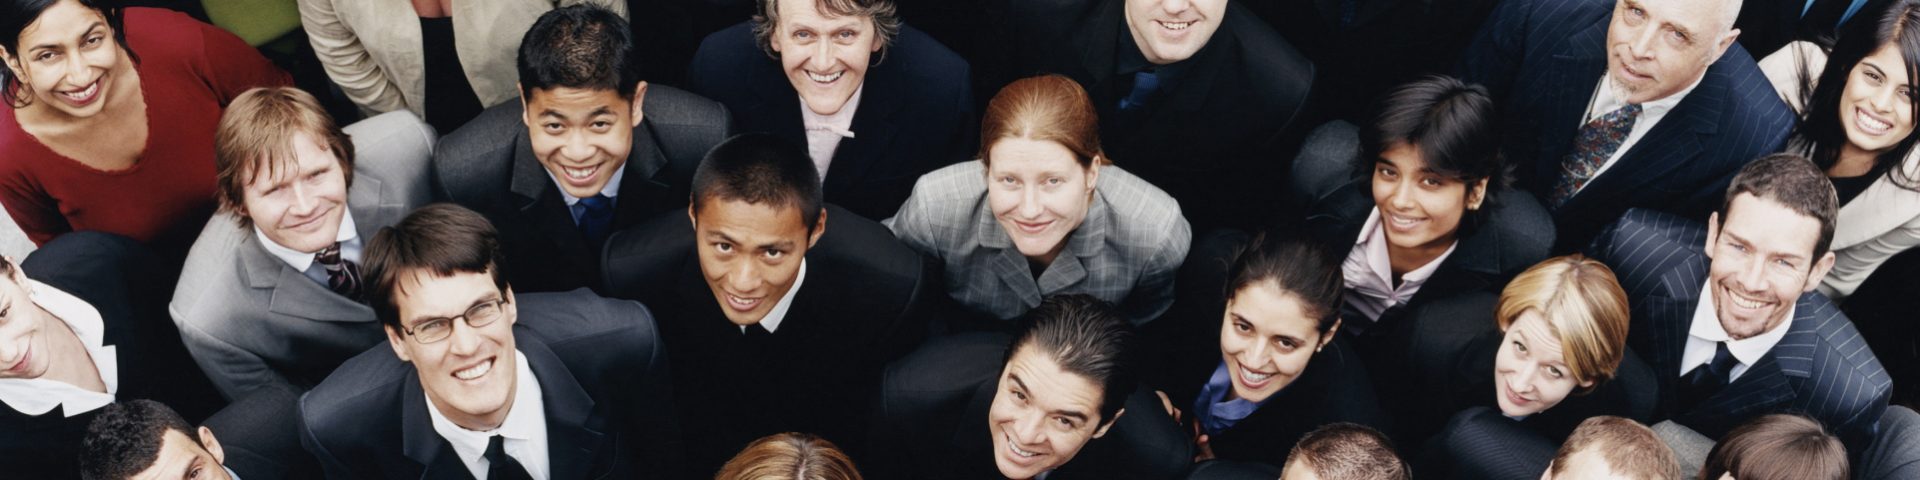 Large Group of Business People Standing and Looking up at Camera